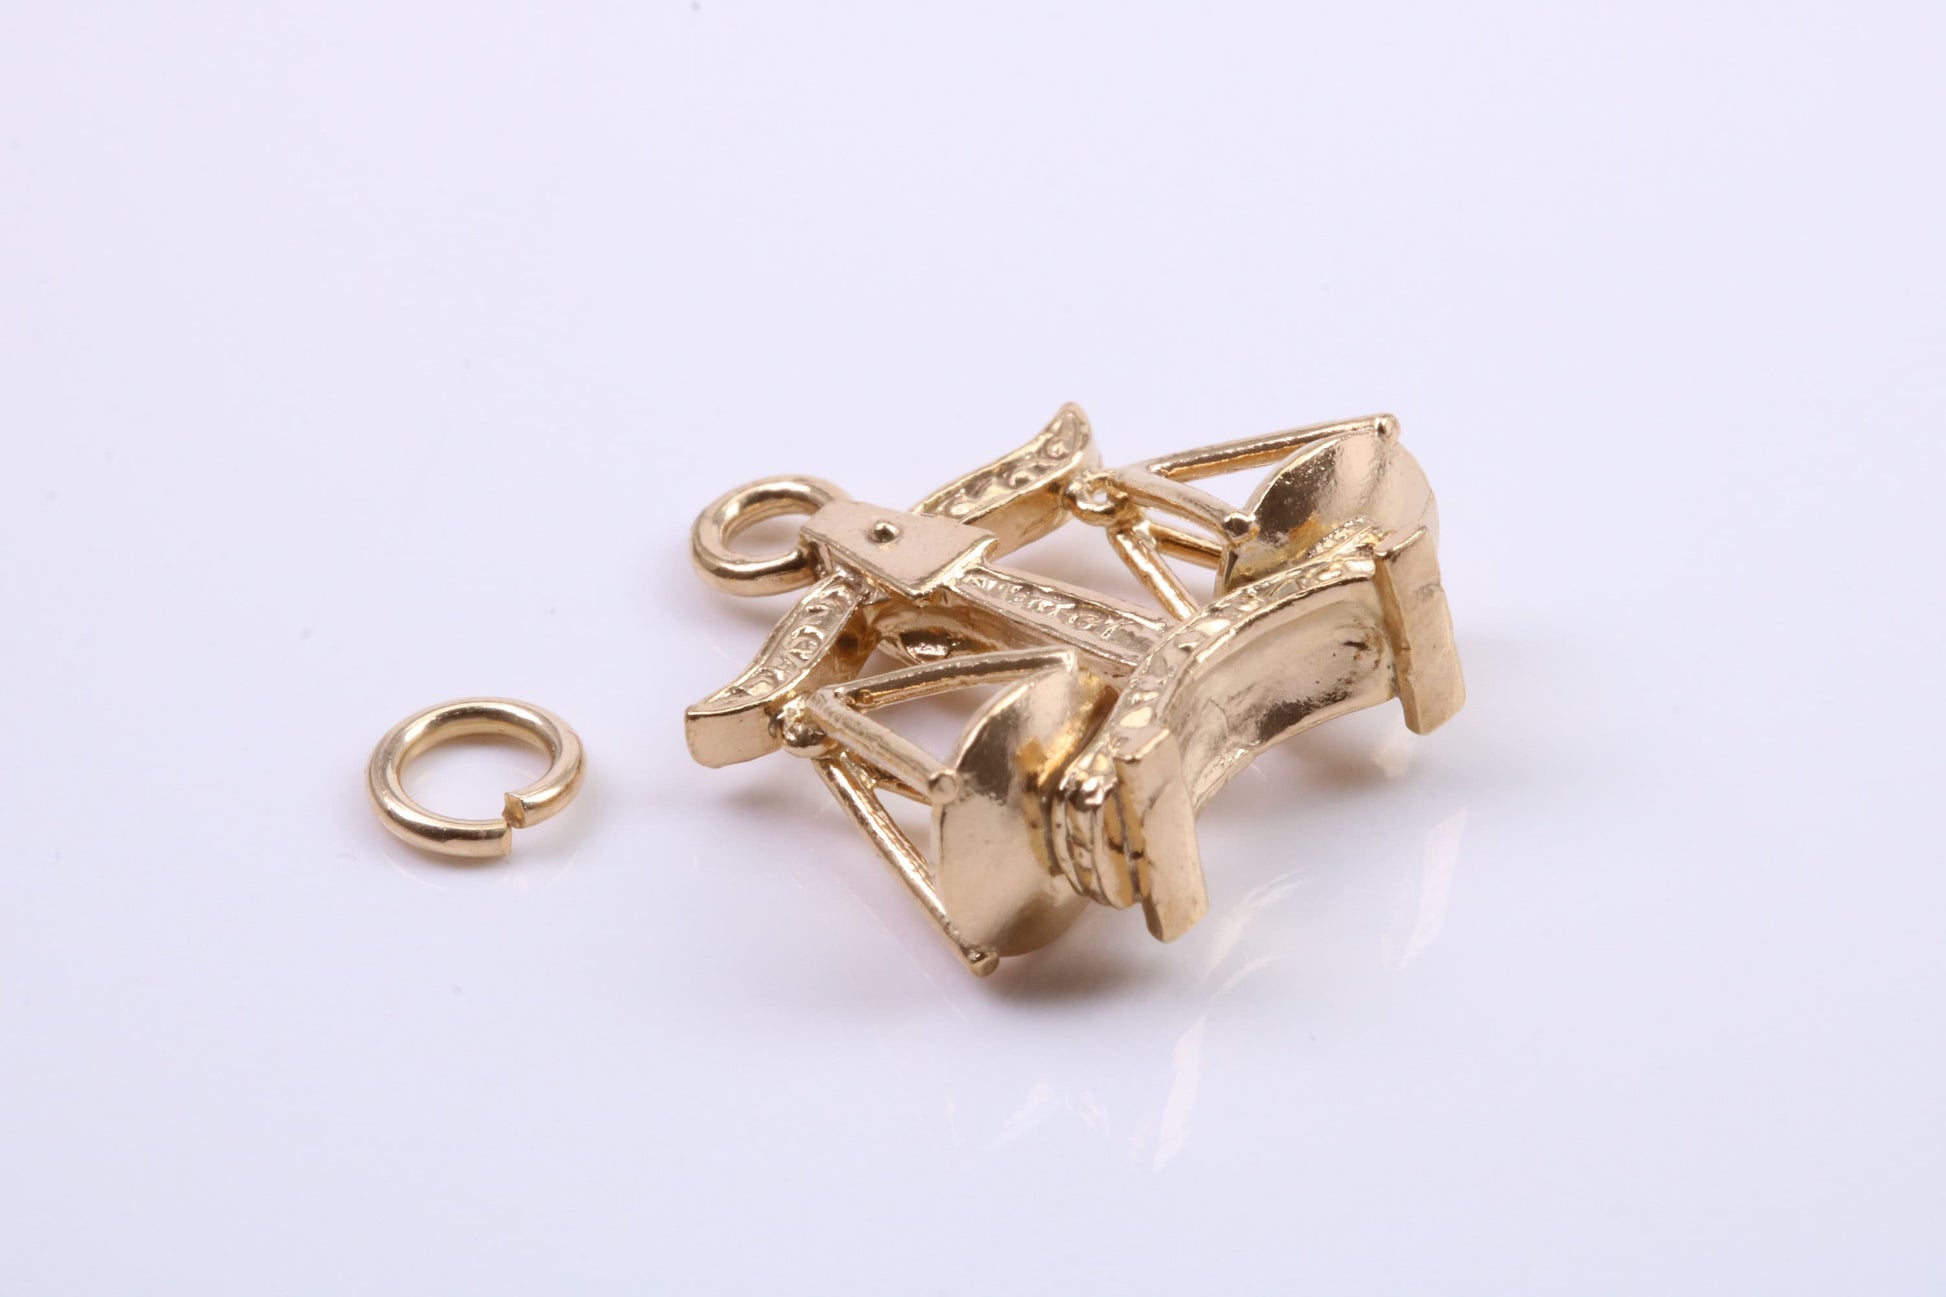 Libra Zodiac Sign Charm, Traditional Charm, Made from Solid 9ct Yellow Gold, British Hallmarked, Complete with Attachment Link